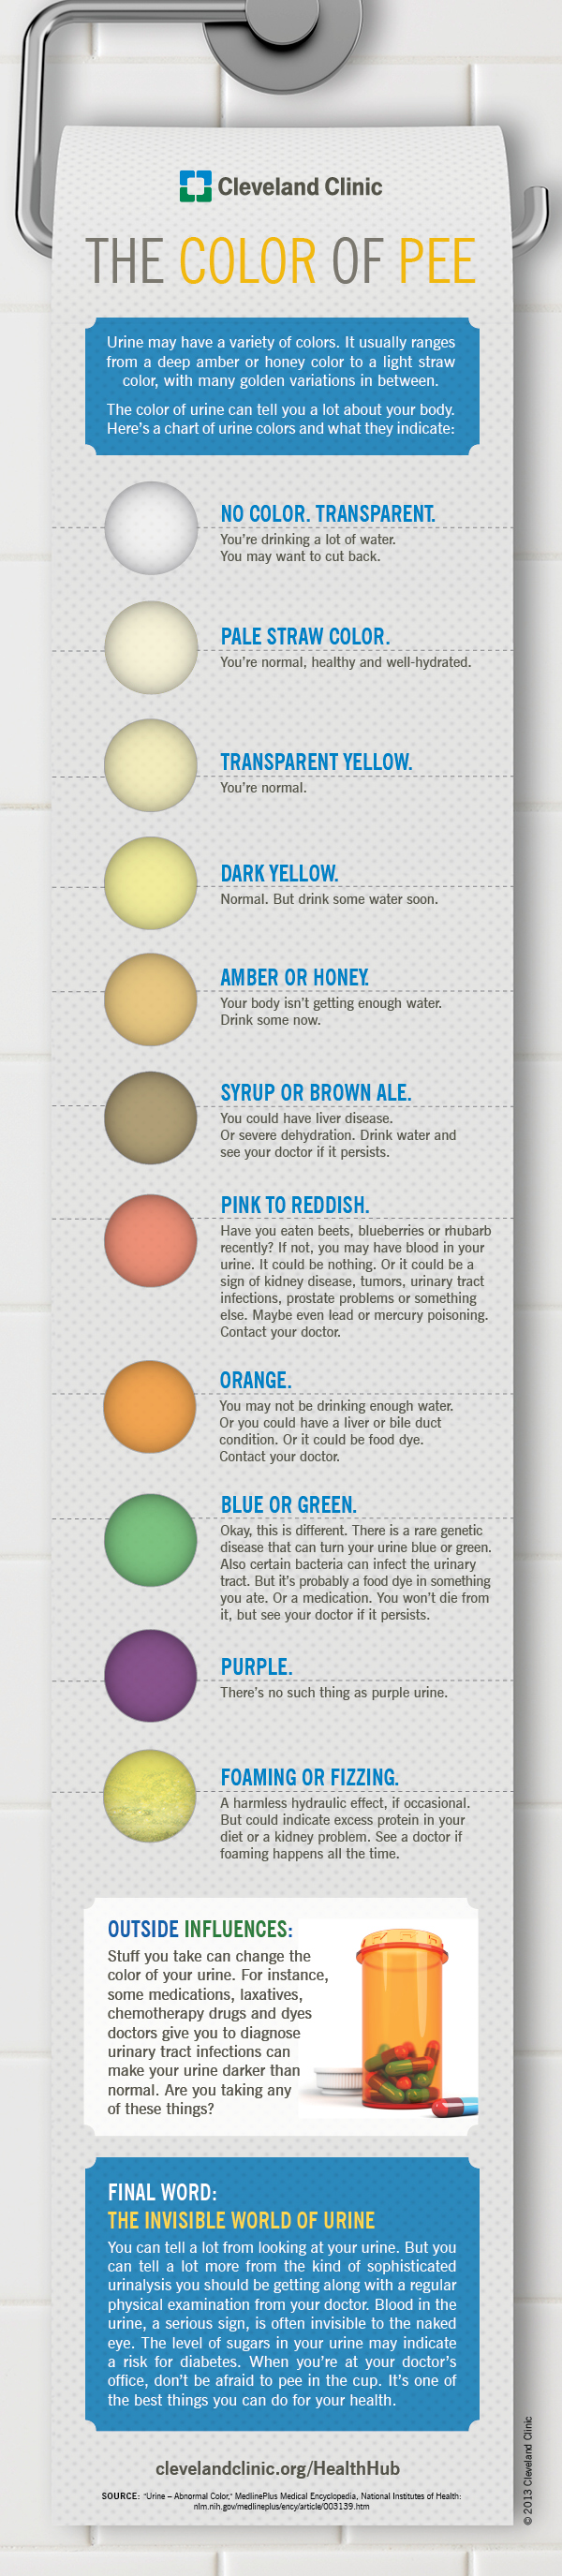 Infographic explaining different colors of pee